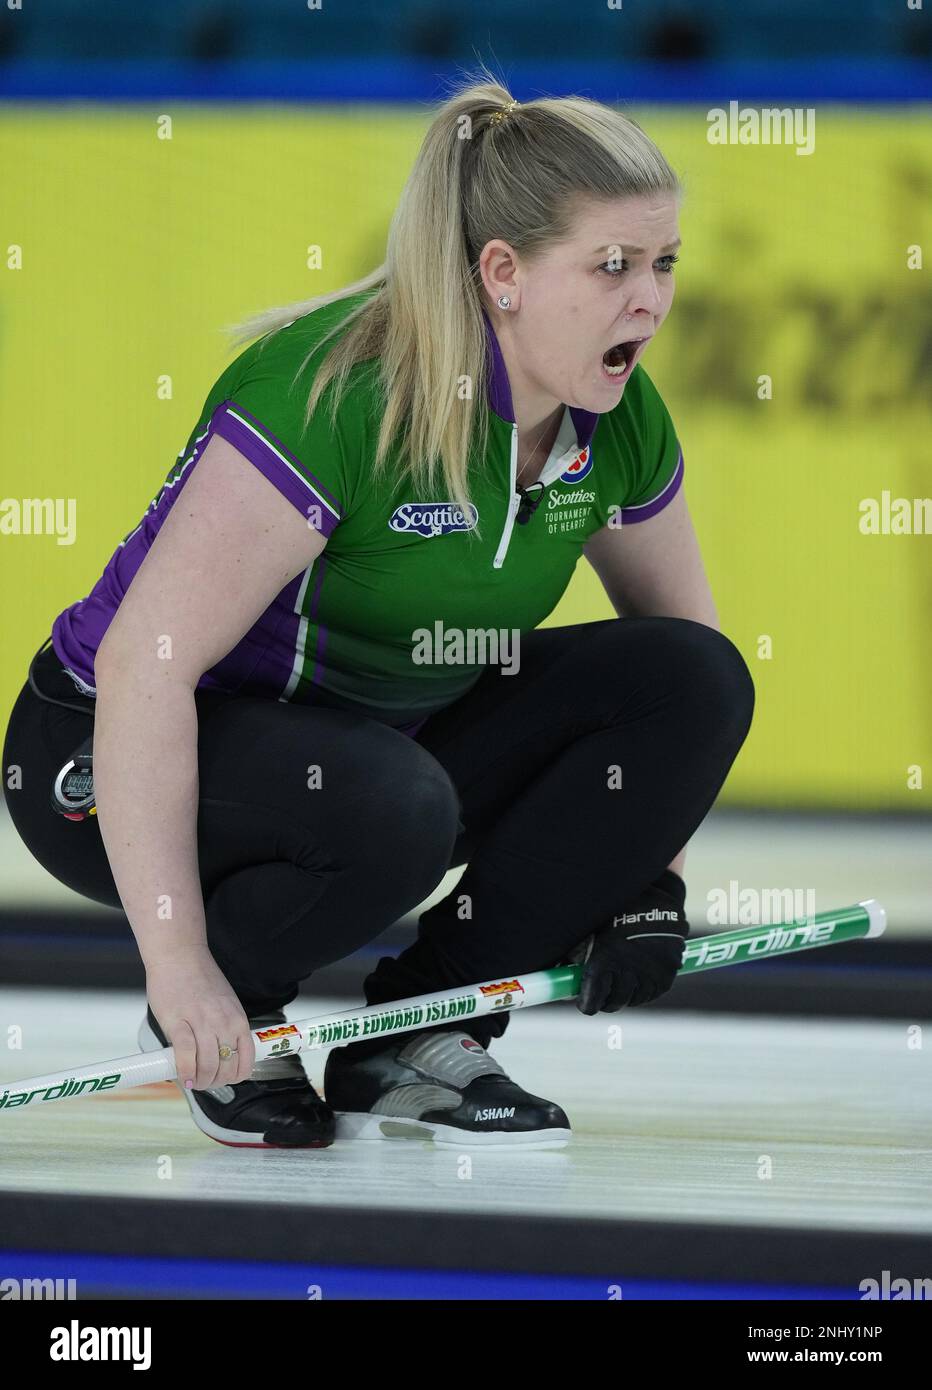 Prince Edward Island skip Marie Christianson calls out to the sweepers while playing against Alberta at the Scotties Tournament of Hearts curling event Tuesday, Feb